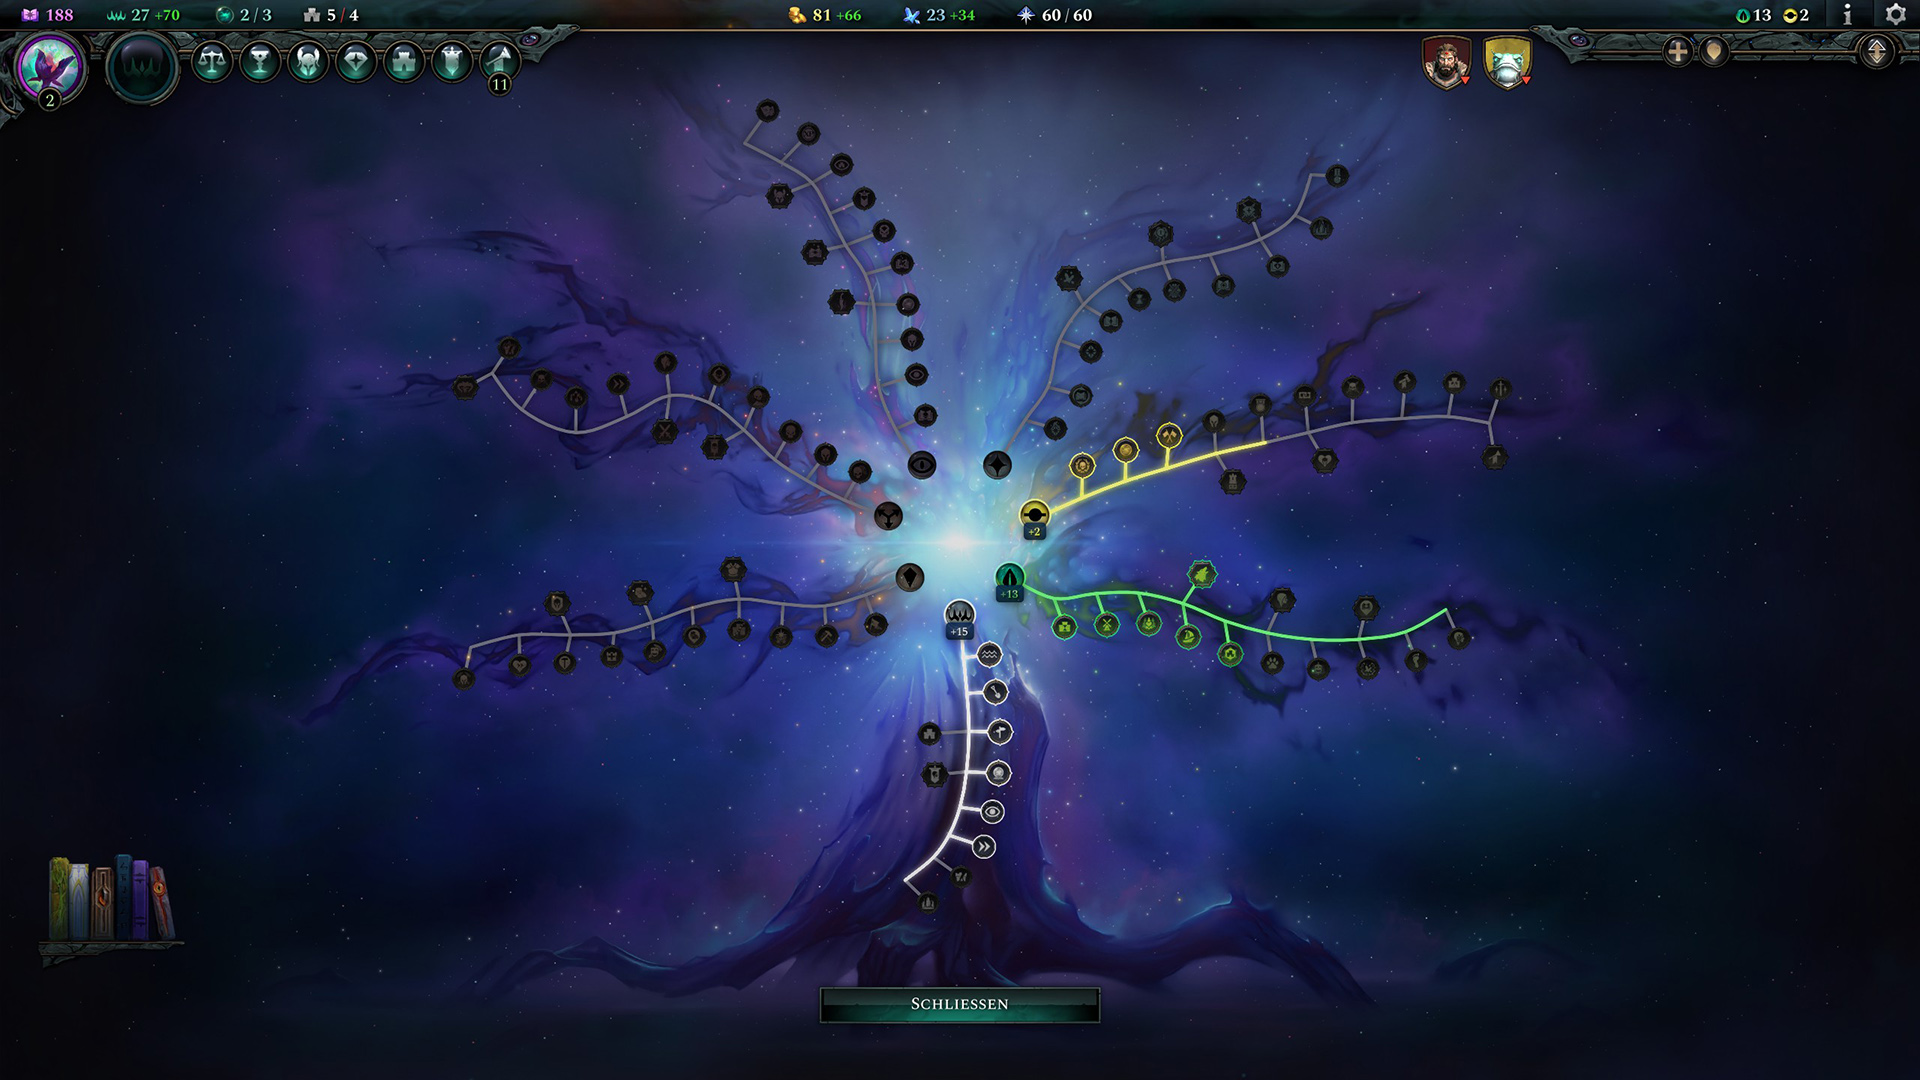 The research tree in Age of Wonders 4 with the areas Nature, Order, Chaos, Astral, Shadow, Materium and the trunk.